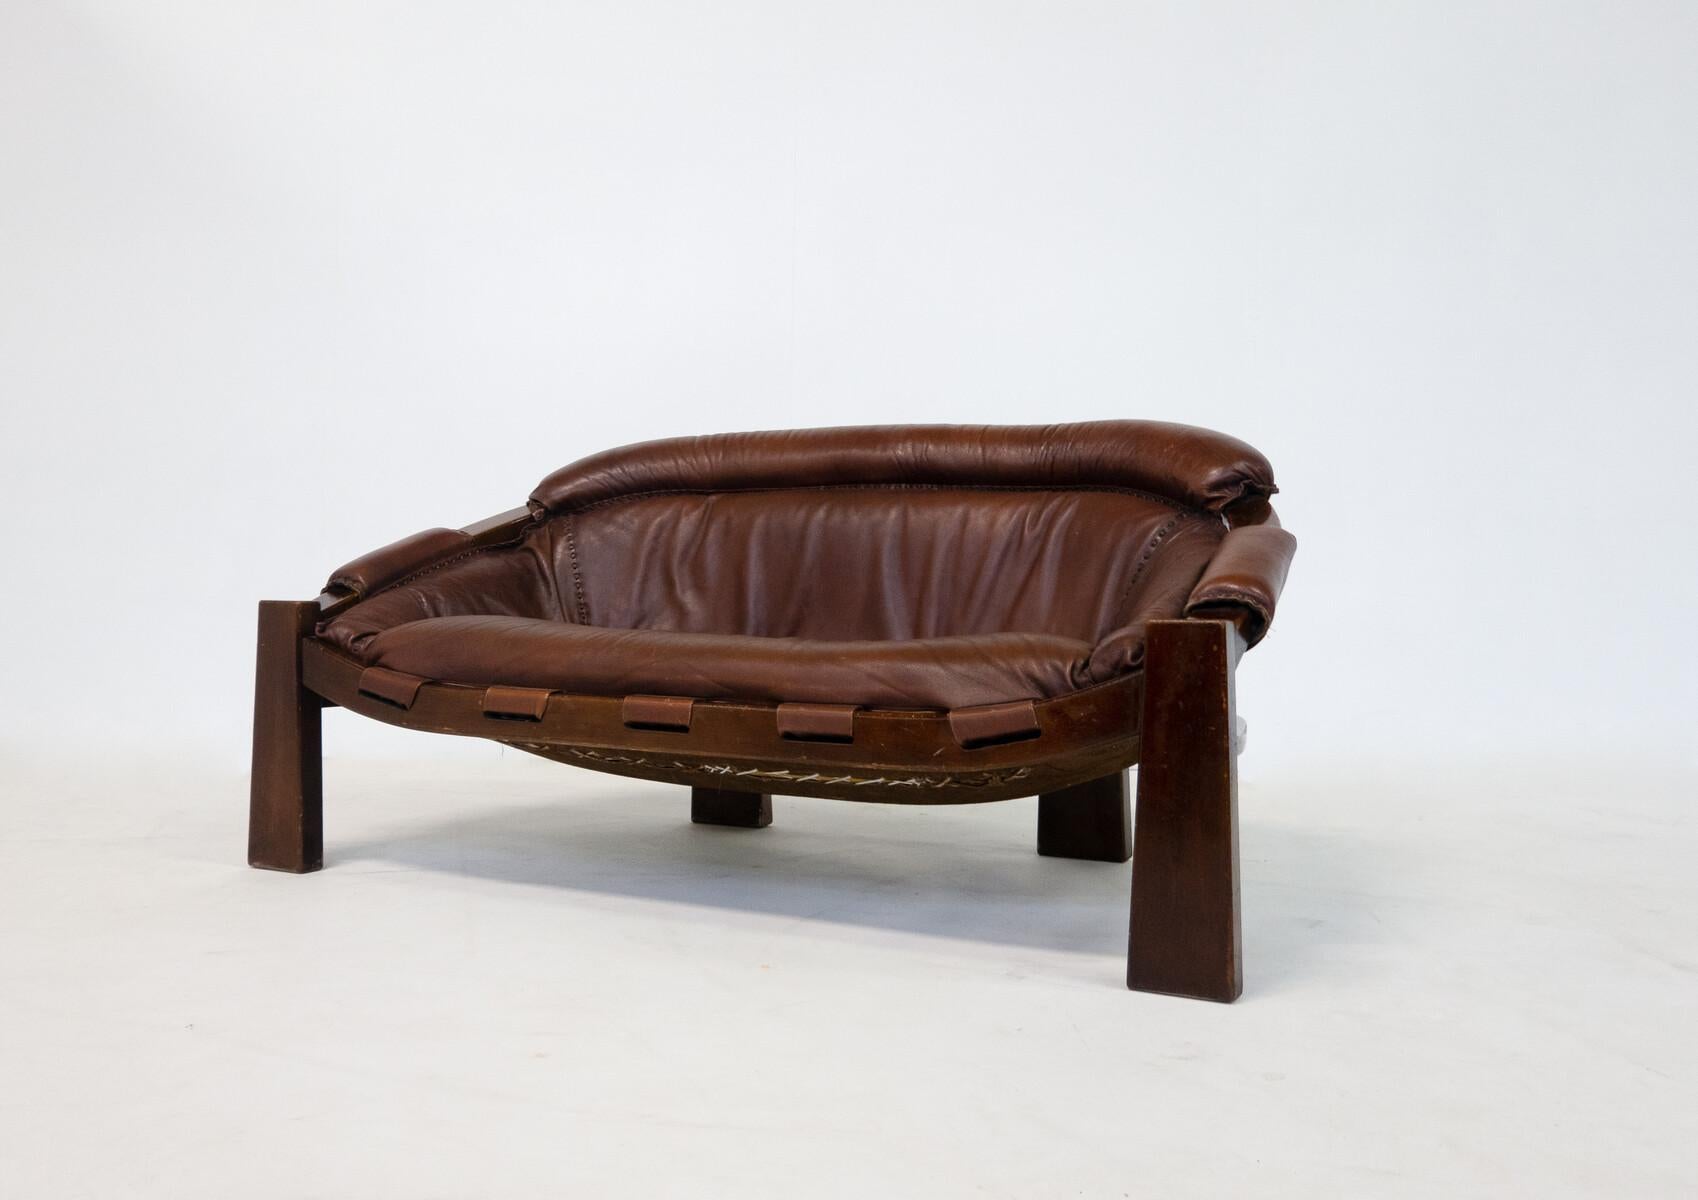 Mid-Century Modern Italian Sofa by Luciano Frigerio, Leather, 1970s For Sale 8